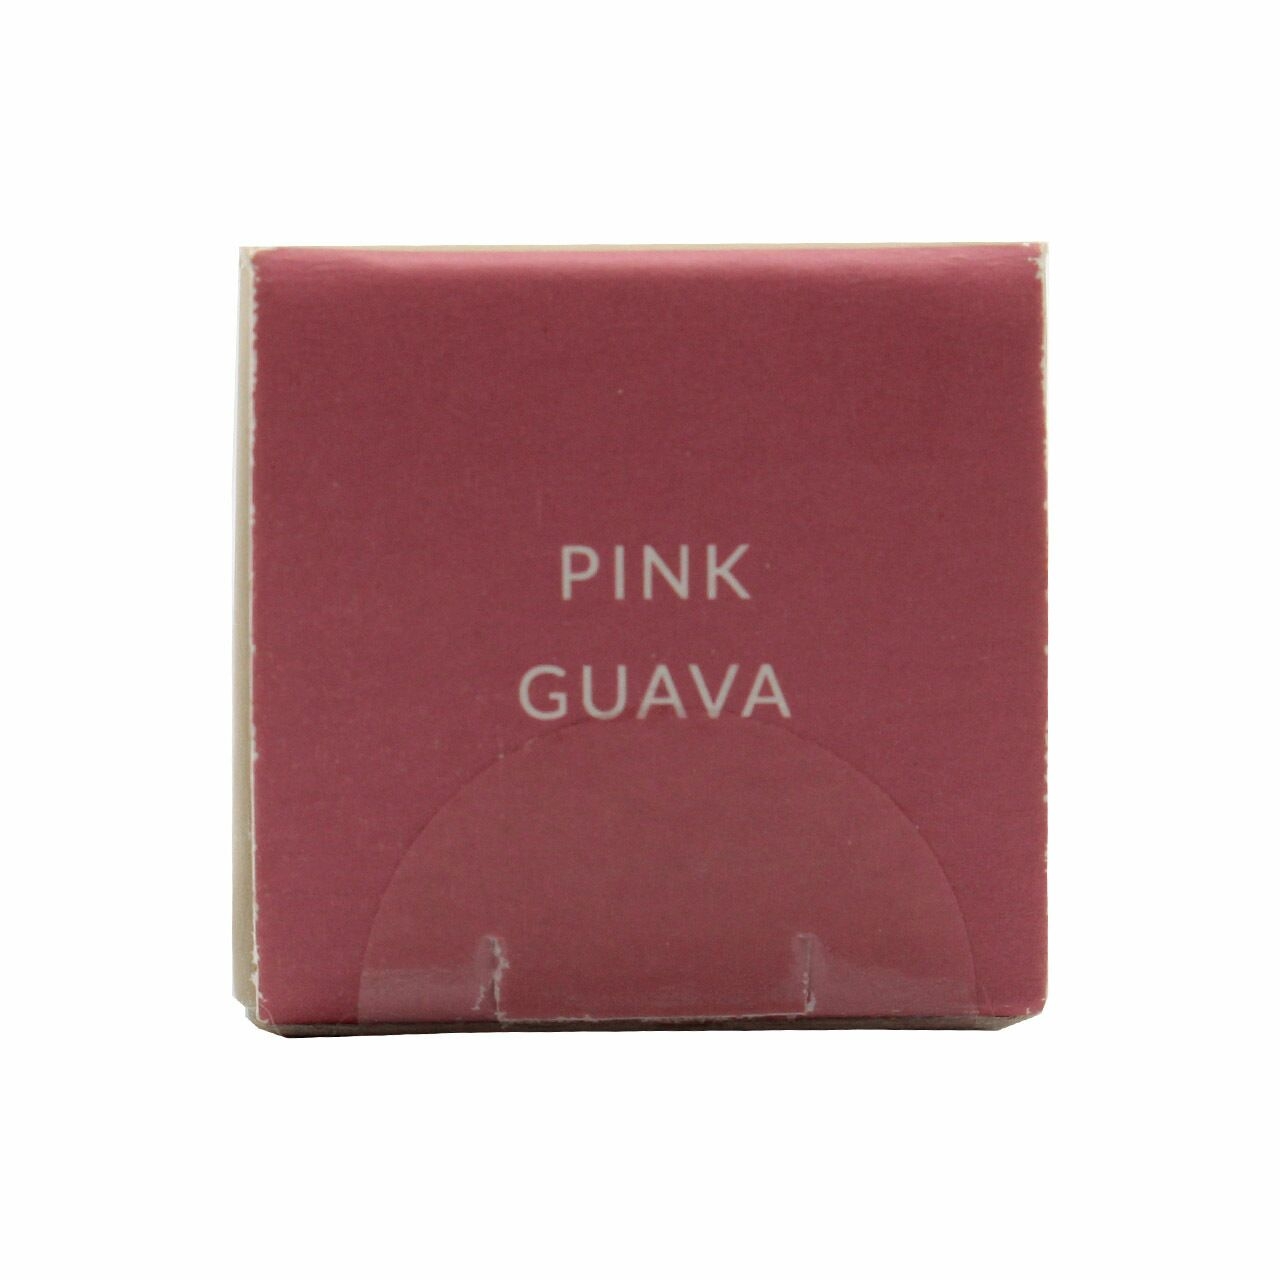 By Lizzie Parra Cheek Stain Pink Guava Faces